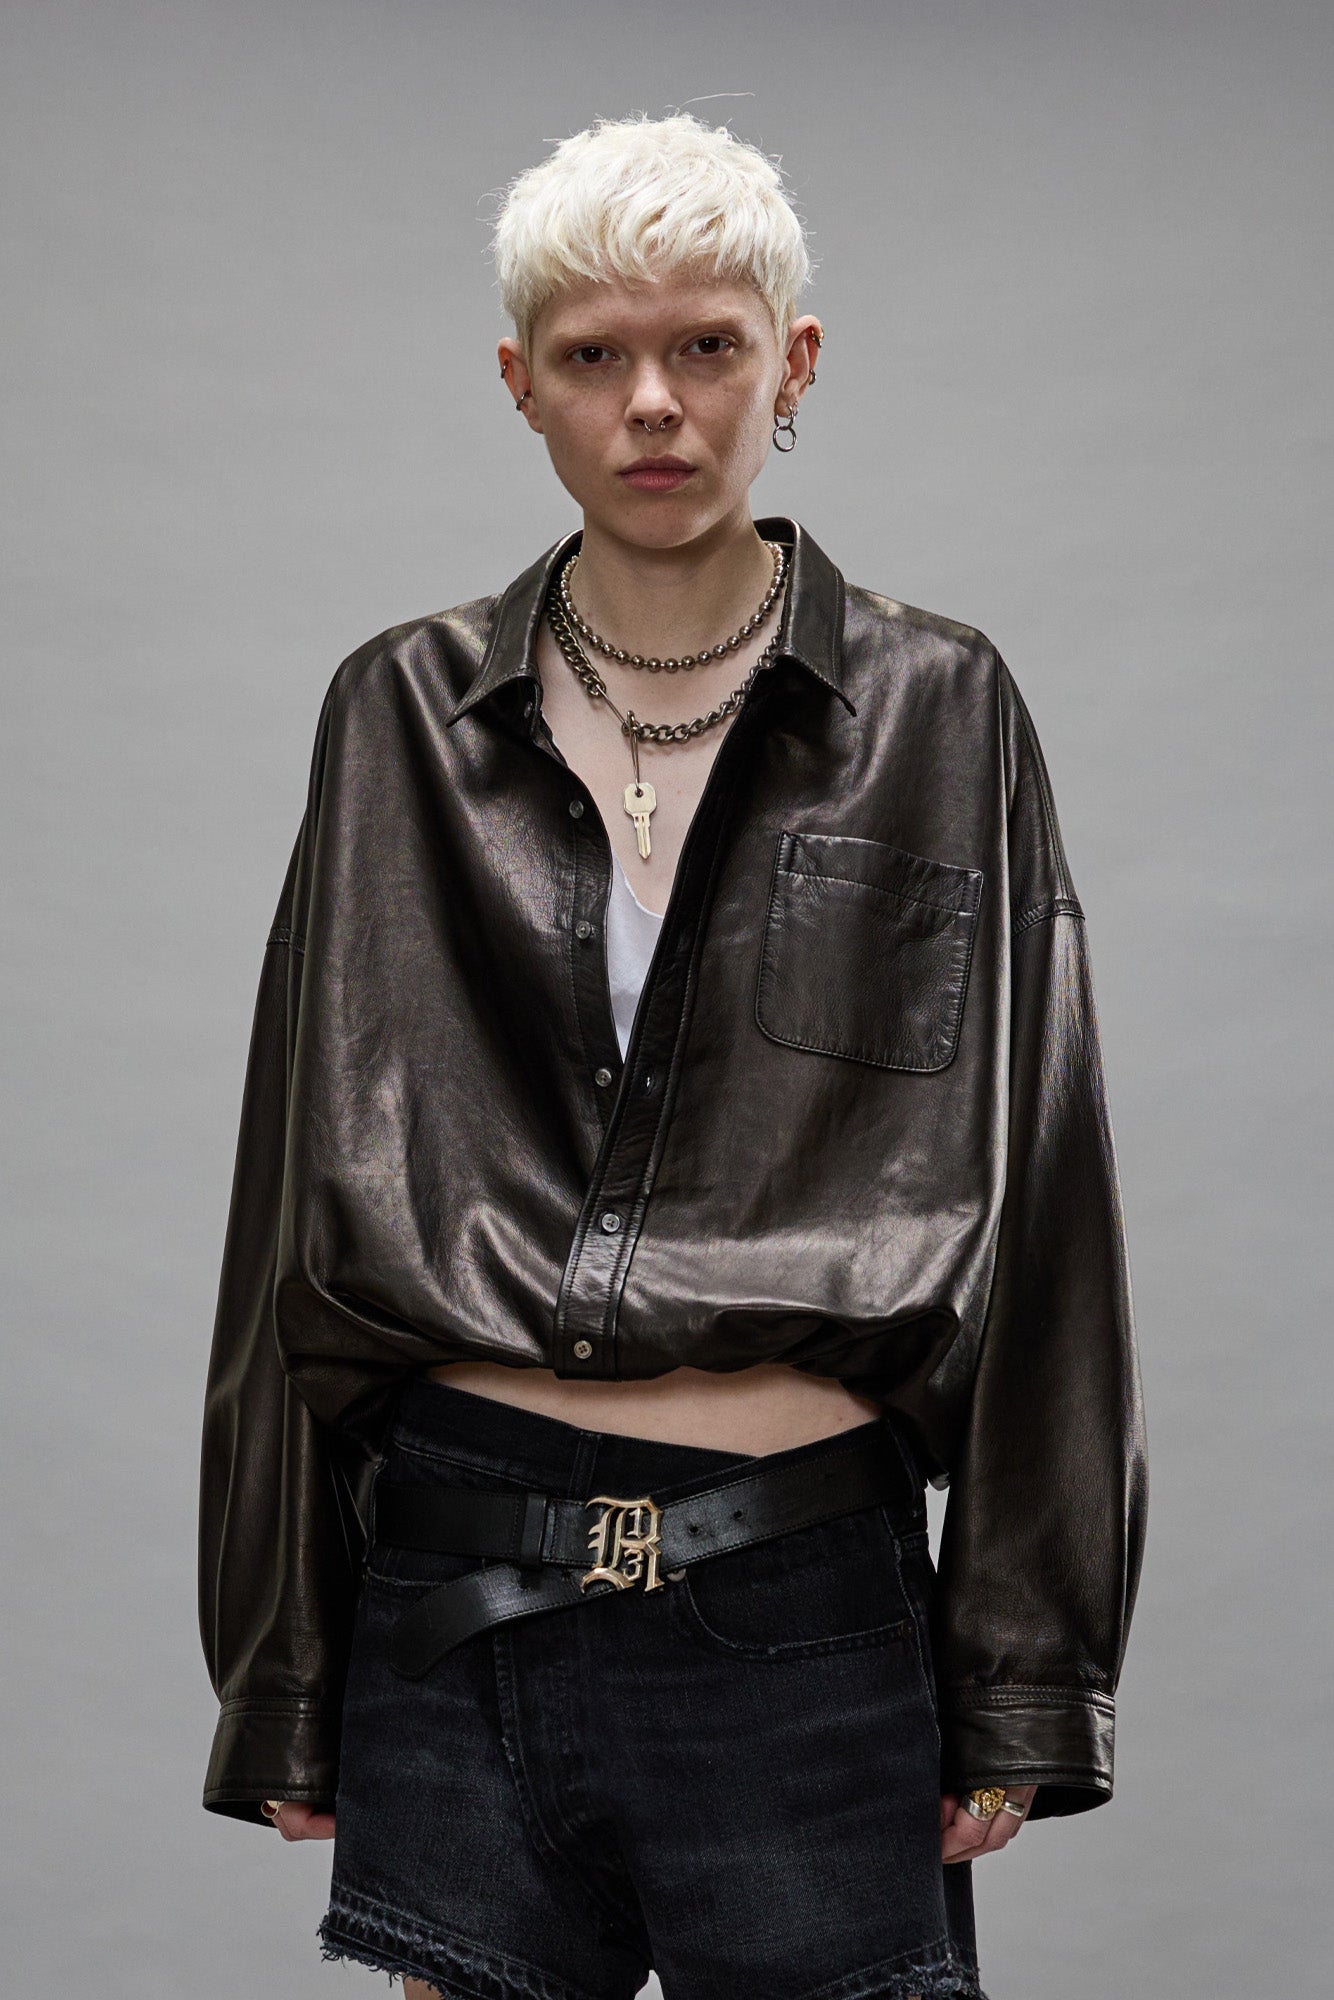 CROSSOVER LEATHER BUBBLE SHIRT - BLACK